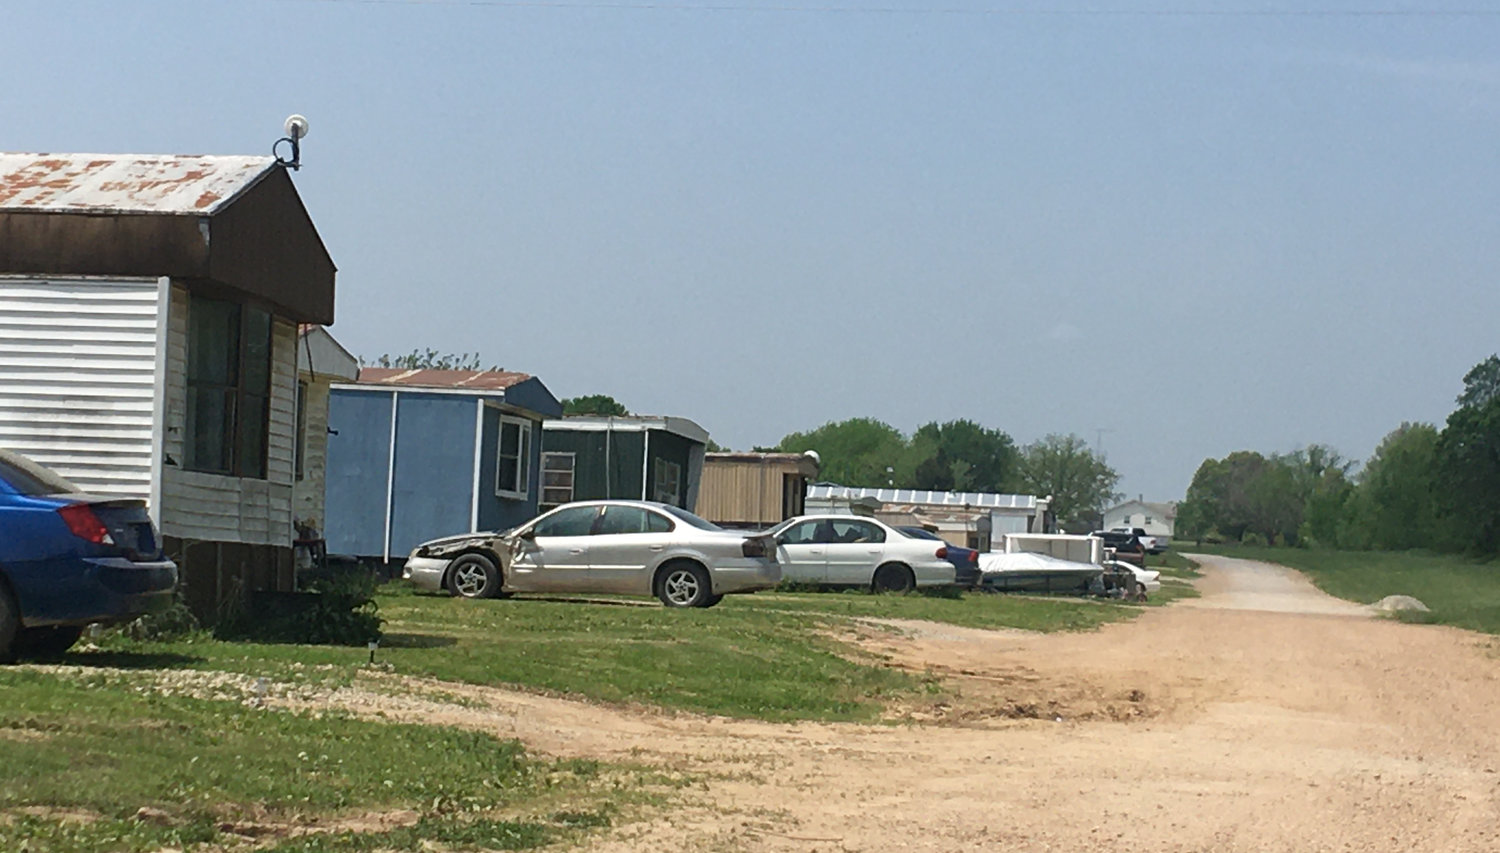 The drive of Goodwill Chapel Trailer Park was the scene of a shooting Tuesday. Dustin C. Arnold, 25, is alleged to have shot a subject causing non-life-threatening injuries.